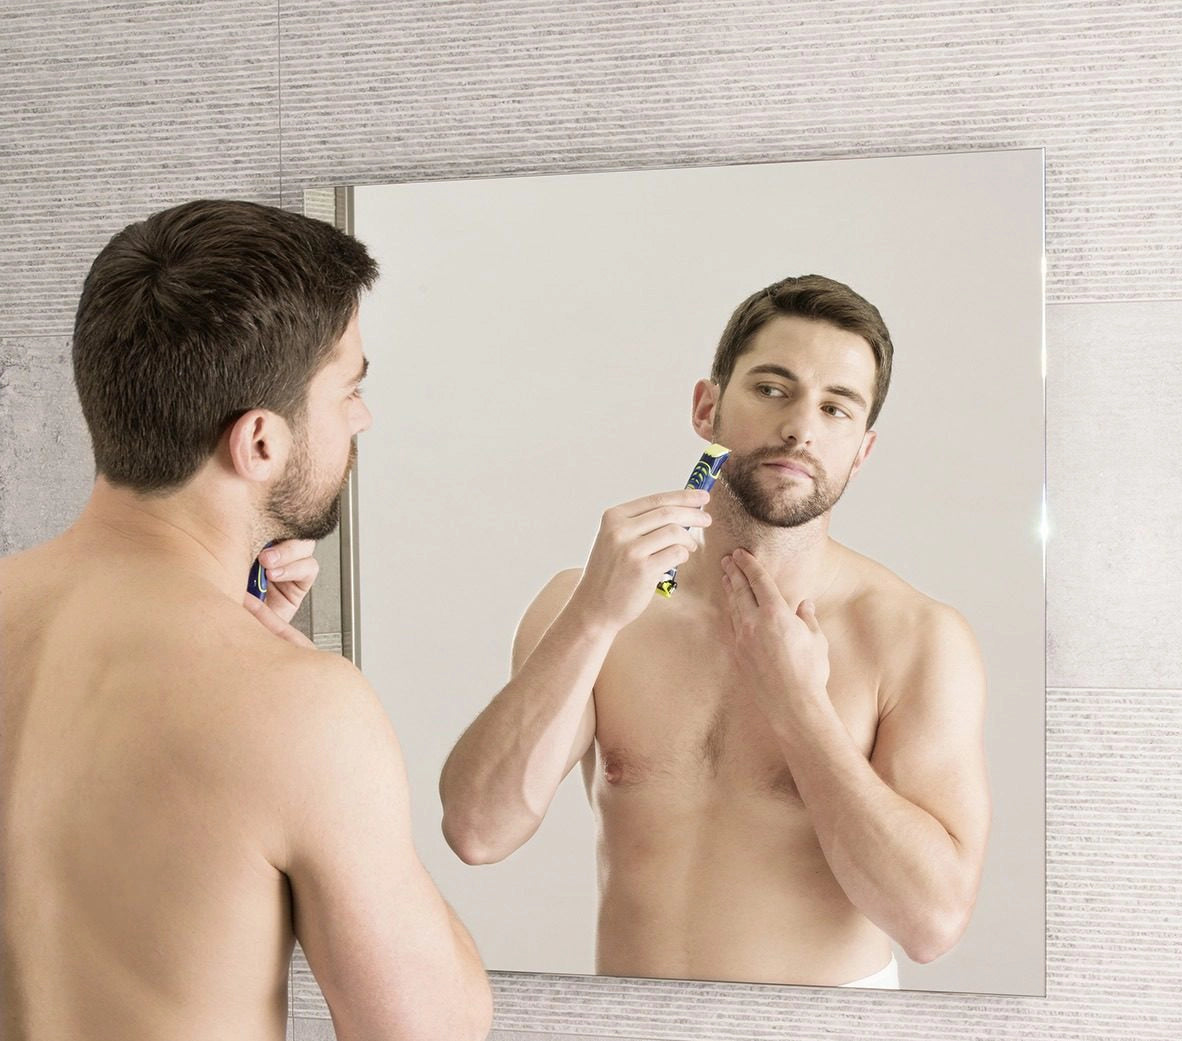 Manscaping Styles: Time To Get Creative With Our Manscaping Ideas